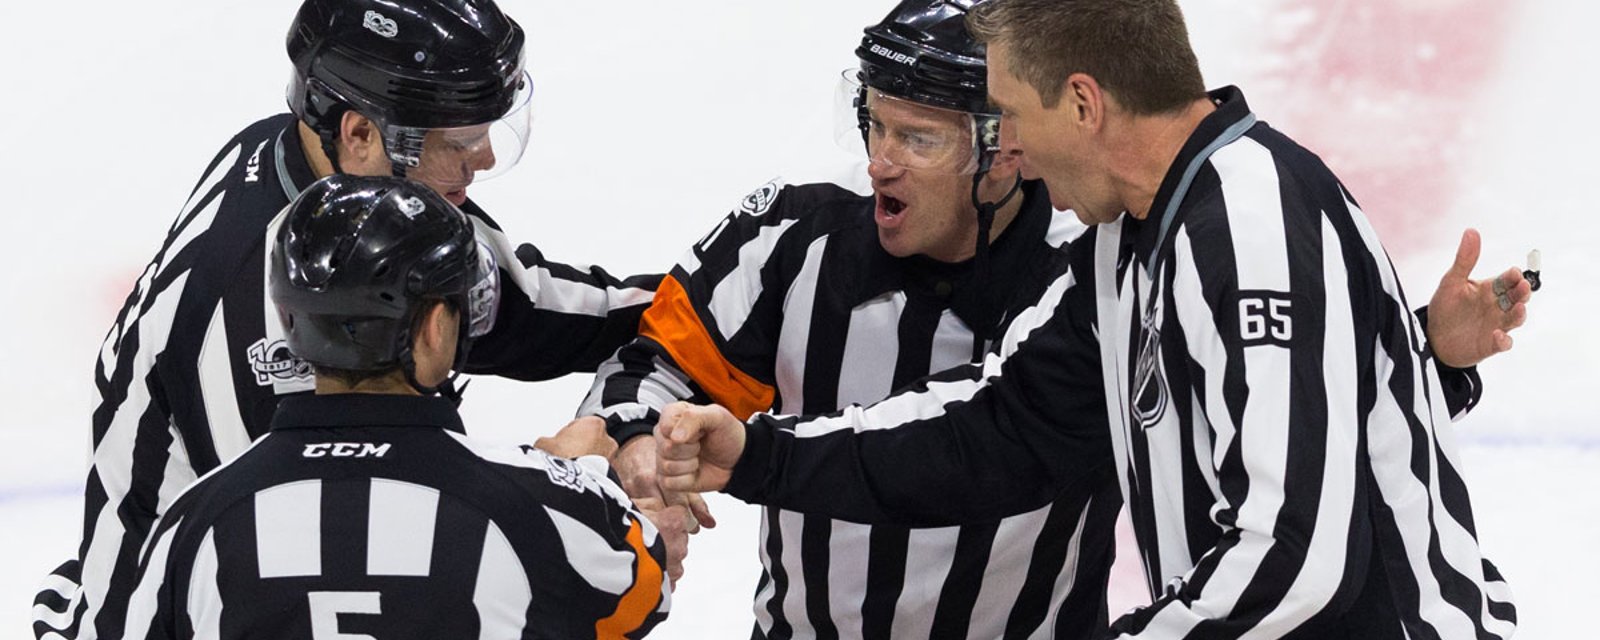 NHL shares video to explain all rules changes in place for the 2019-20 season